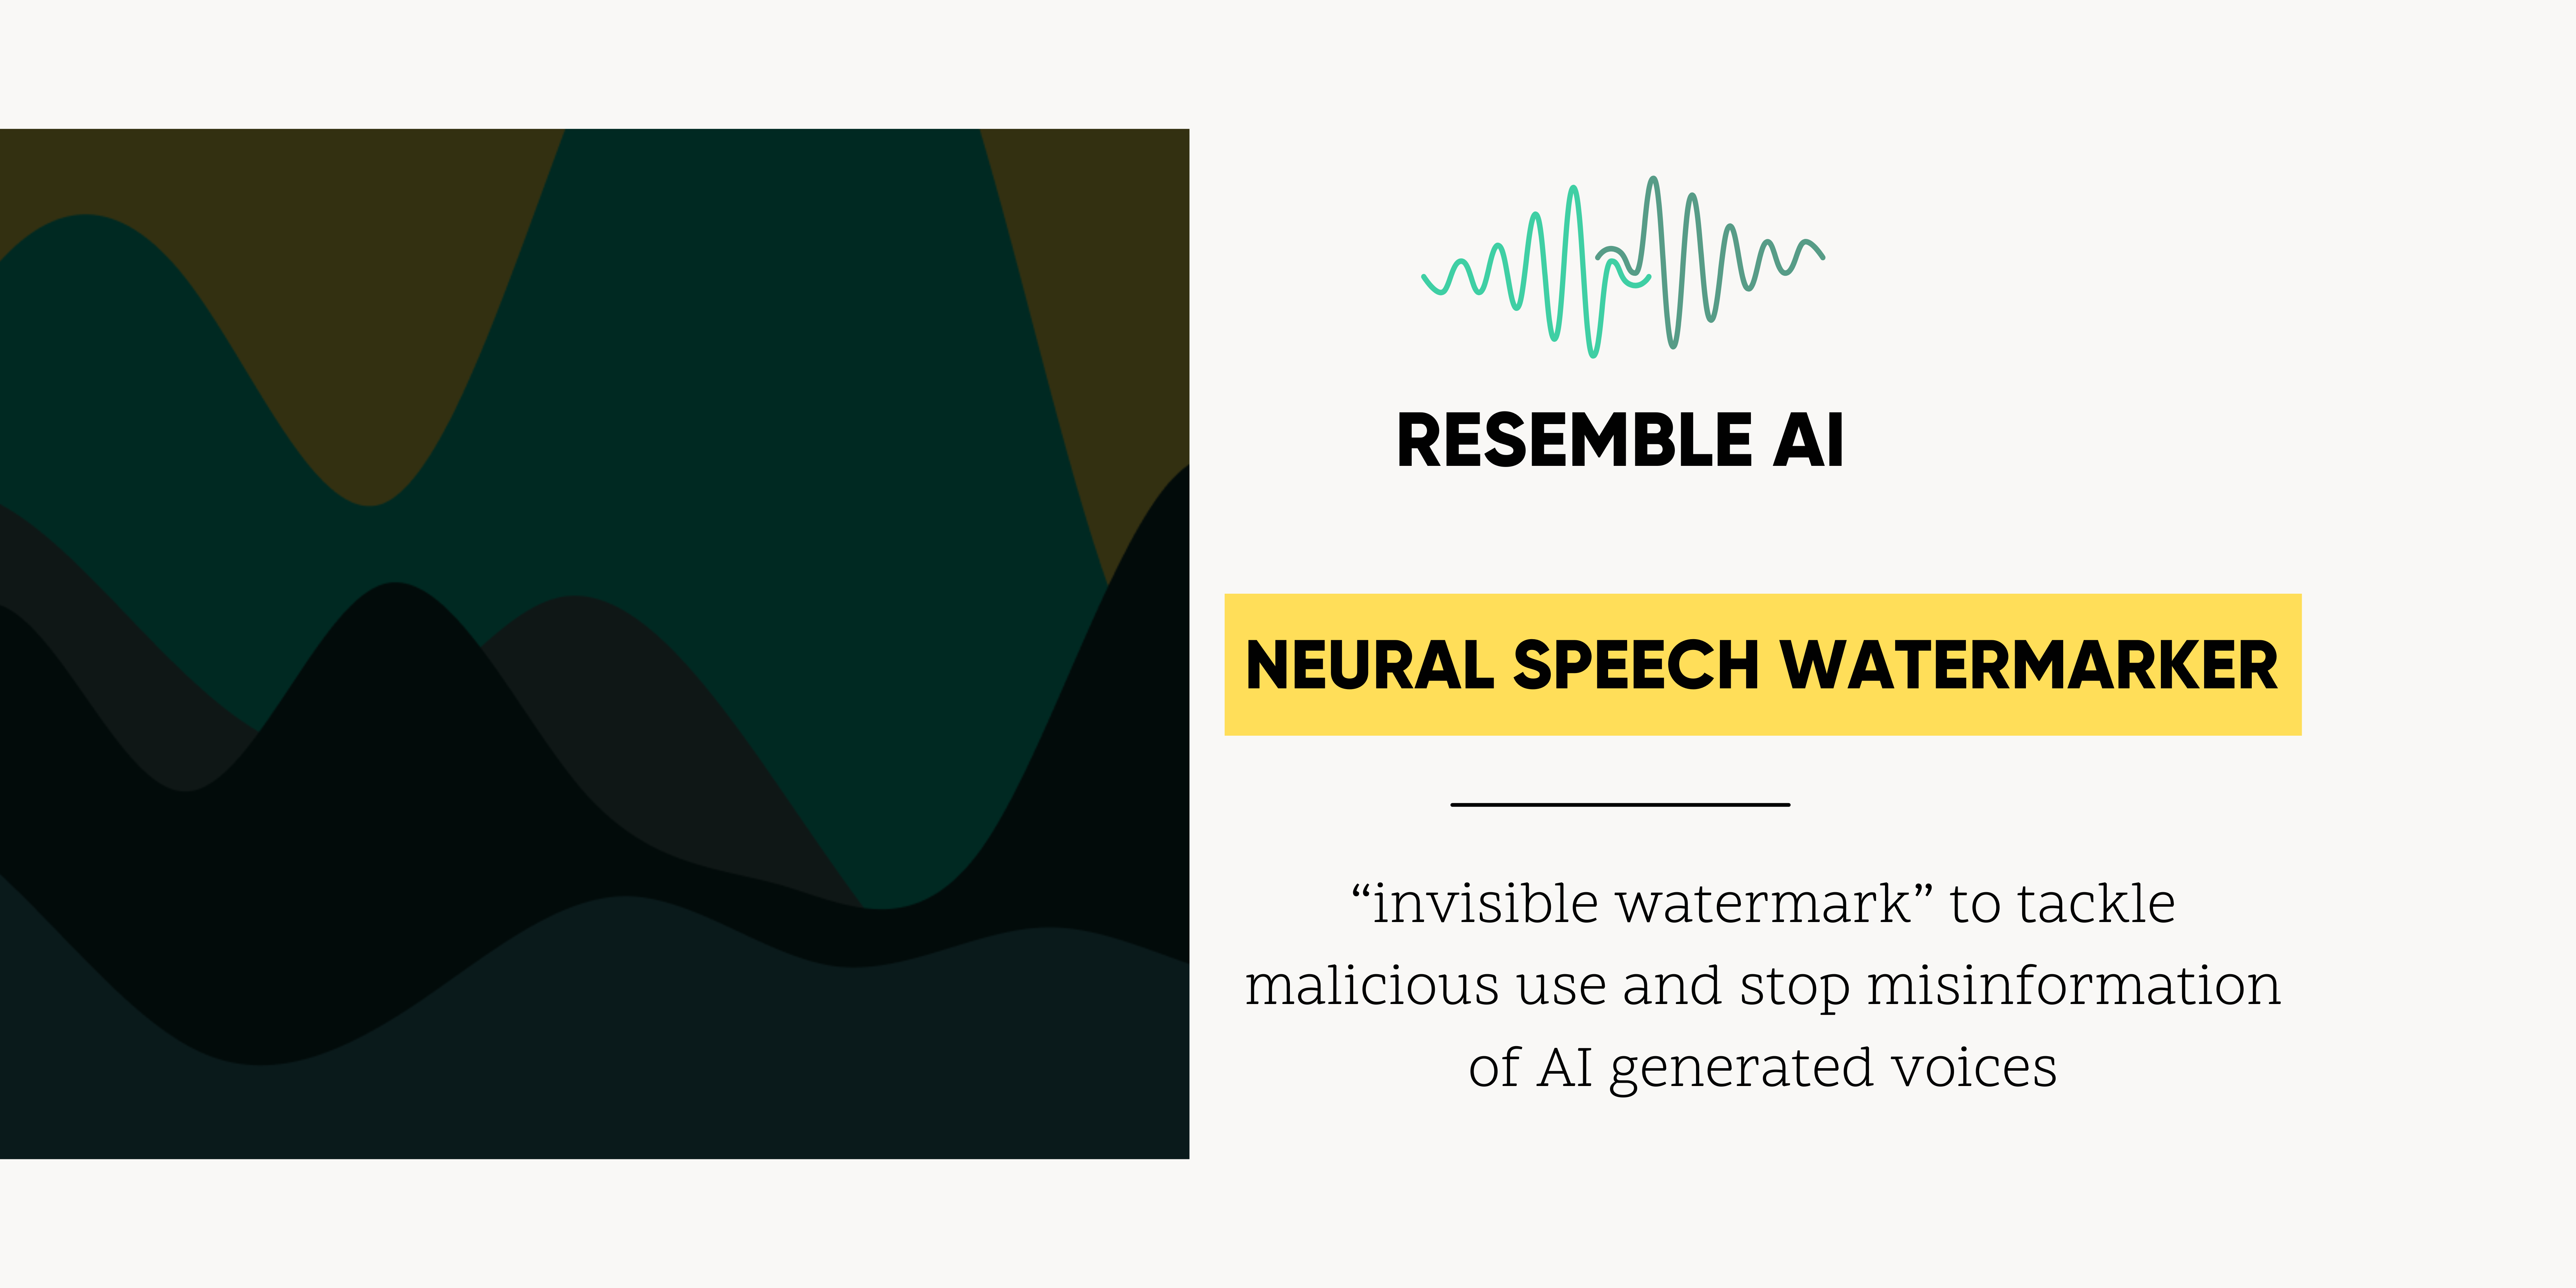 Resemble AI is introducing the PerTh watermarker, a deep neural network watermarker to help the industry tackle malicious use and stop misinformation. The data is embedded in an imperceptible and difficult-to-detect way, acting as an “invisible watermark” to verify if a given clip was generated by Resemble.